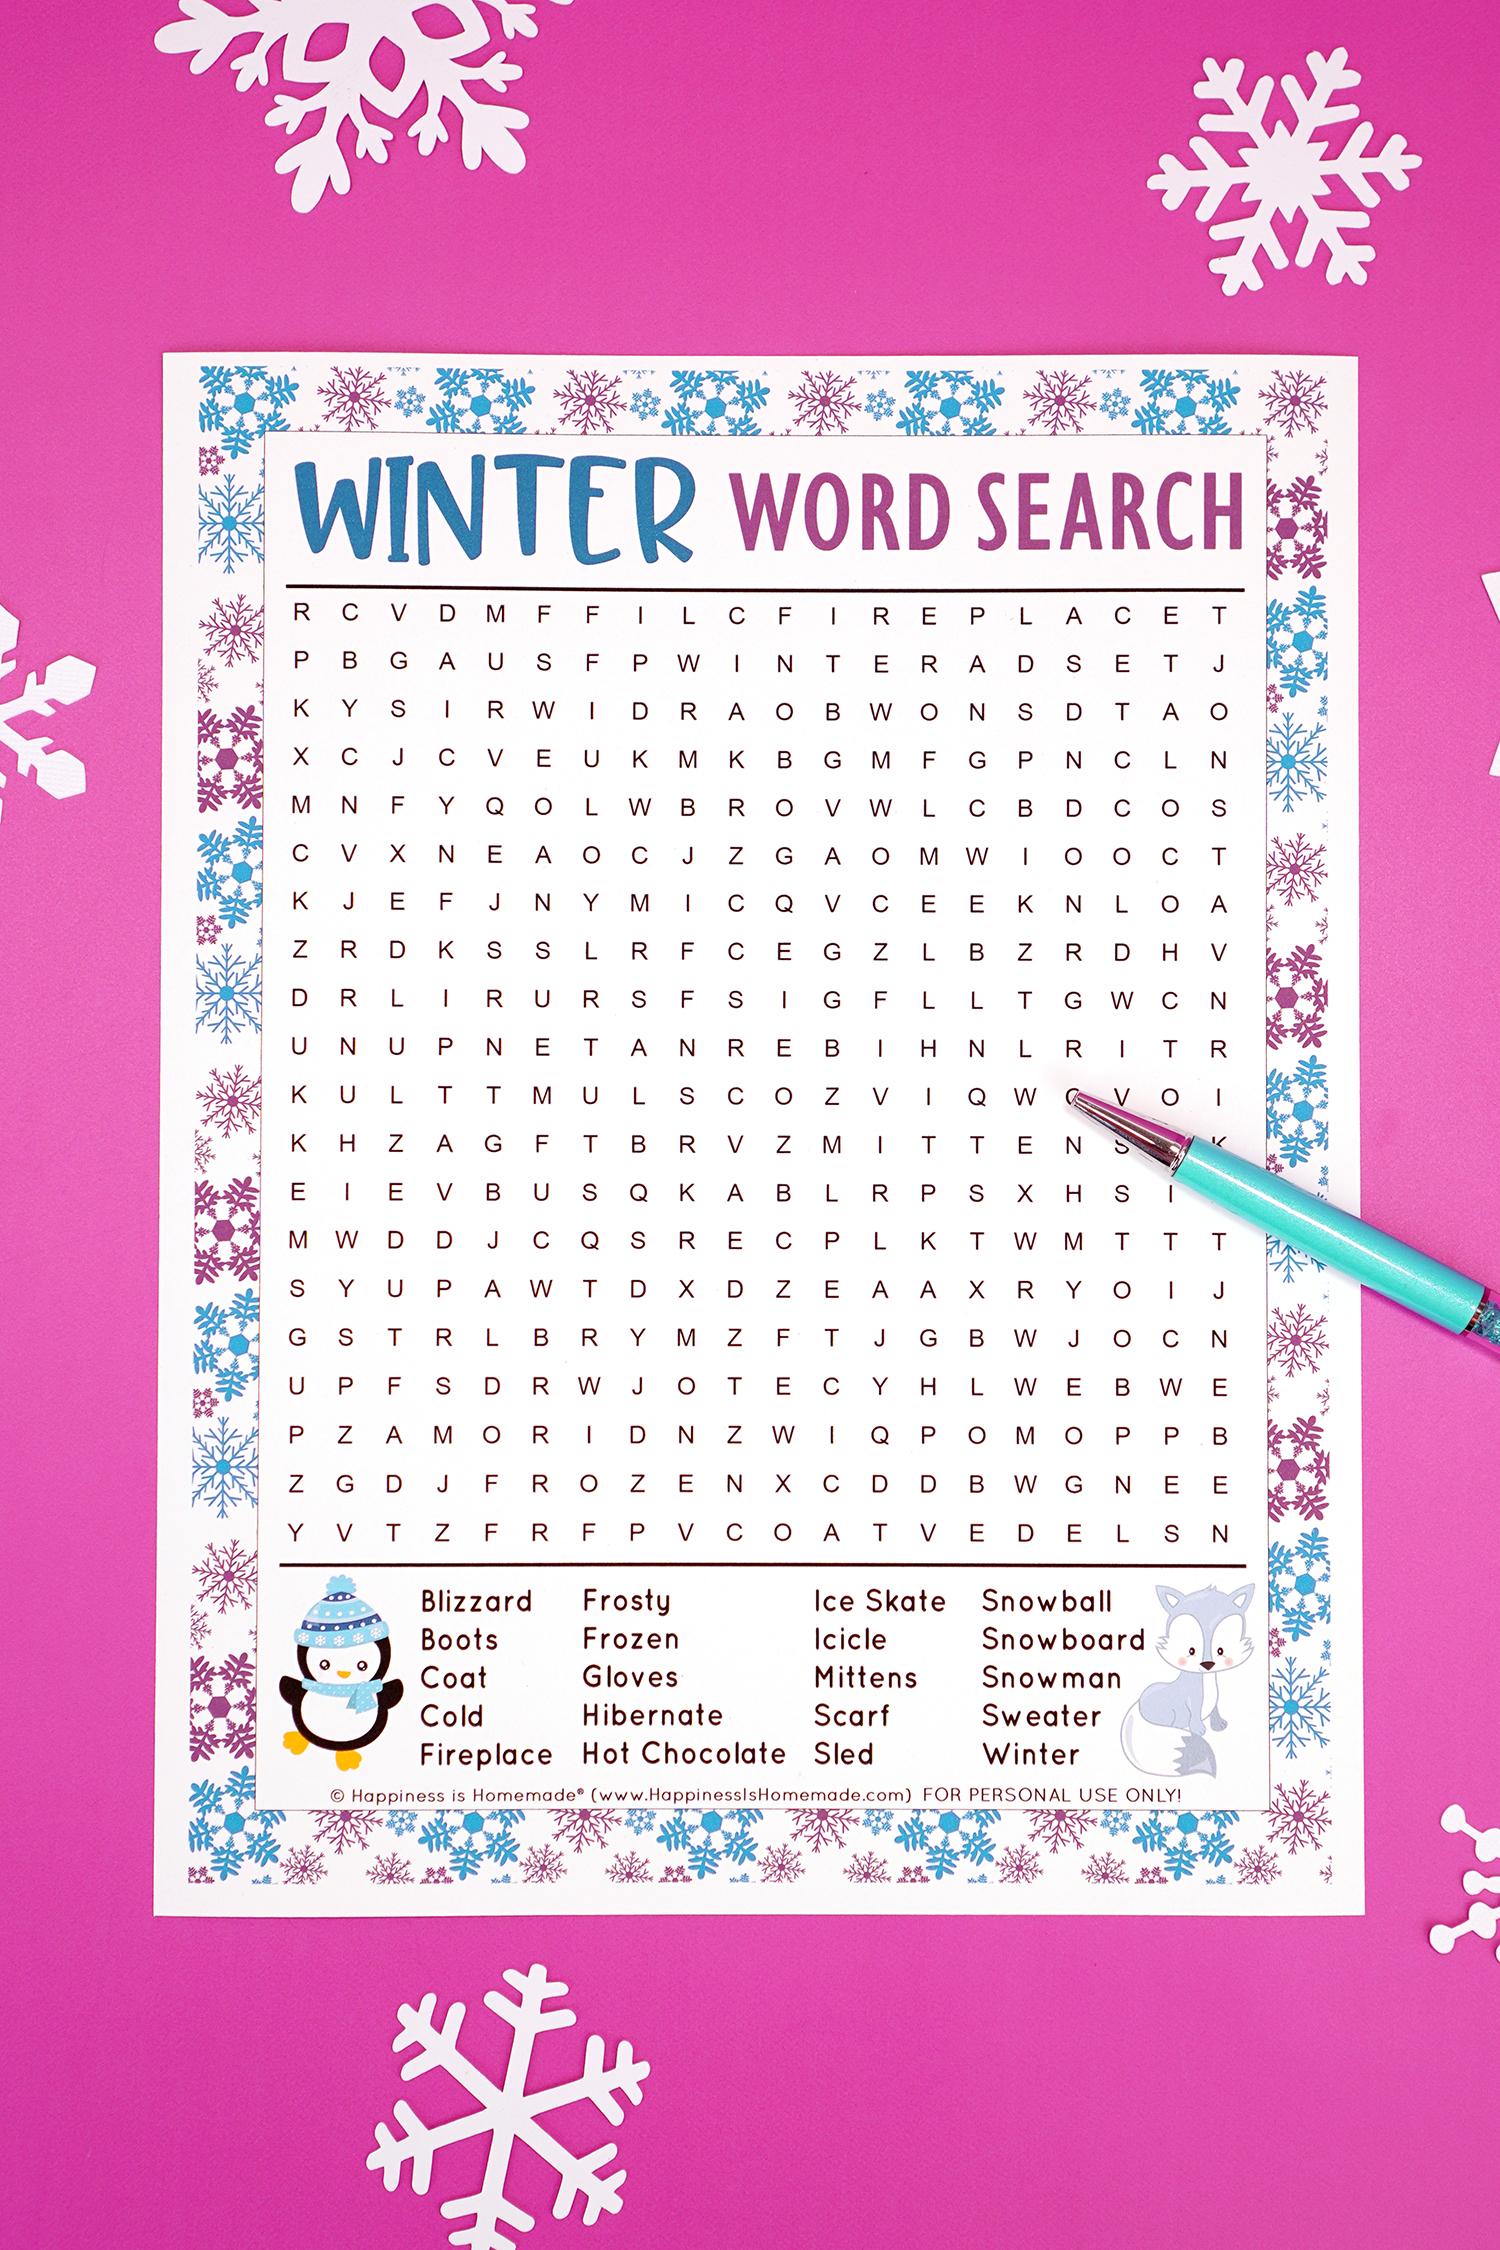 Winter word search printable puzzle on purple background with snowflakes and blue pen